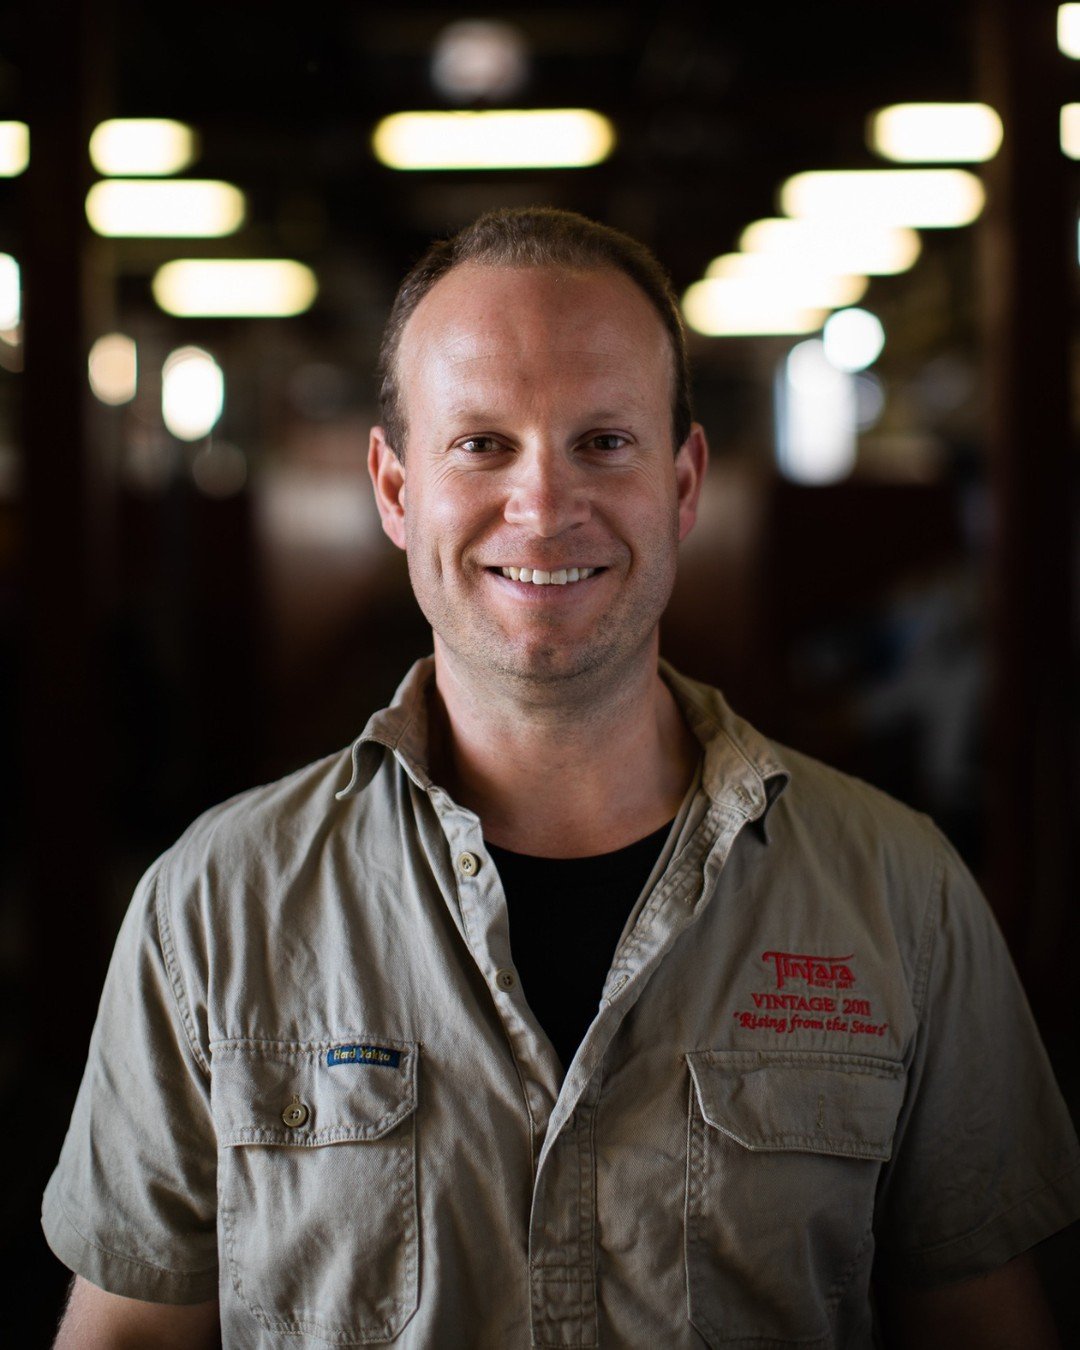 We welcome Charlie Seppelt as a Visiting Judge for the 2024 PKF Hunter Valley Wine Show.

Charlie is a Senior Winemaker for the Randall Wine Group based in McLaren Vale. Since 2001, he has participated in vintages nationally and internationally, incl